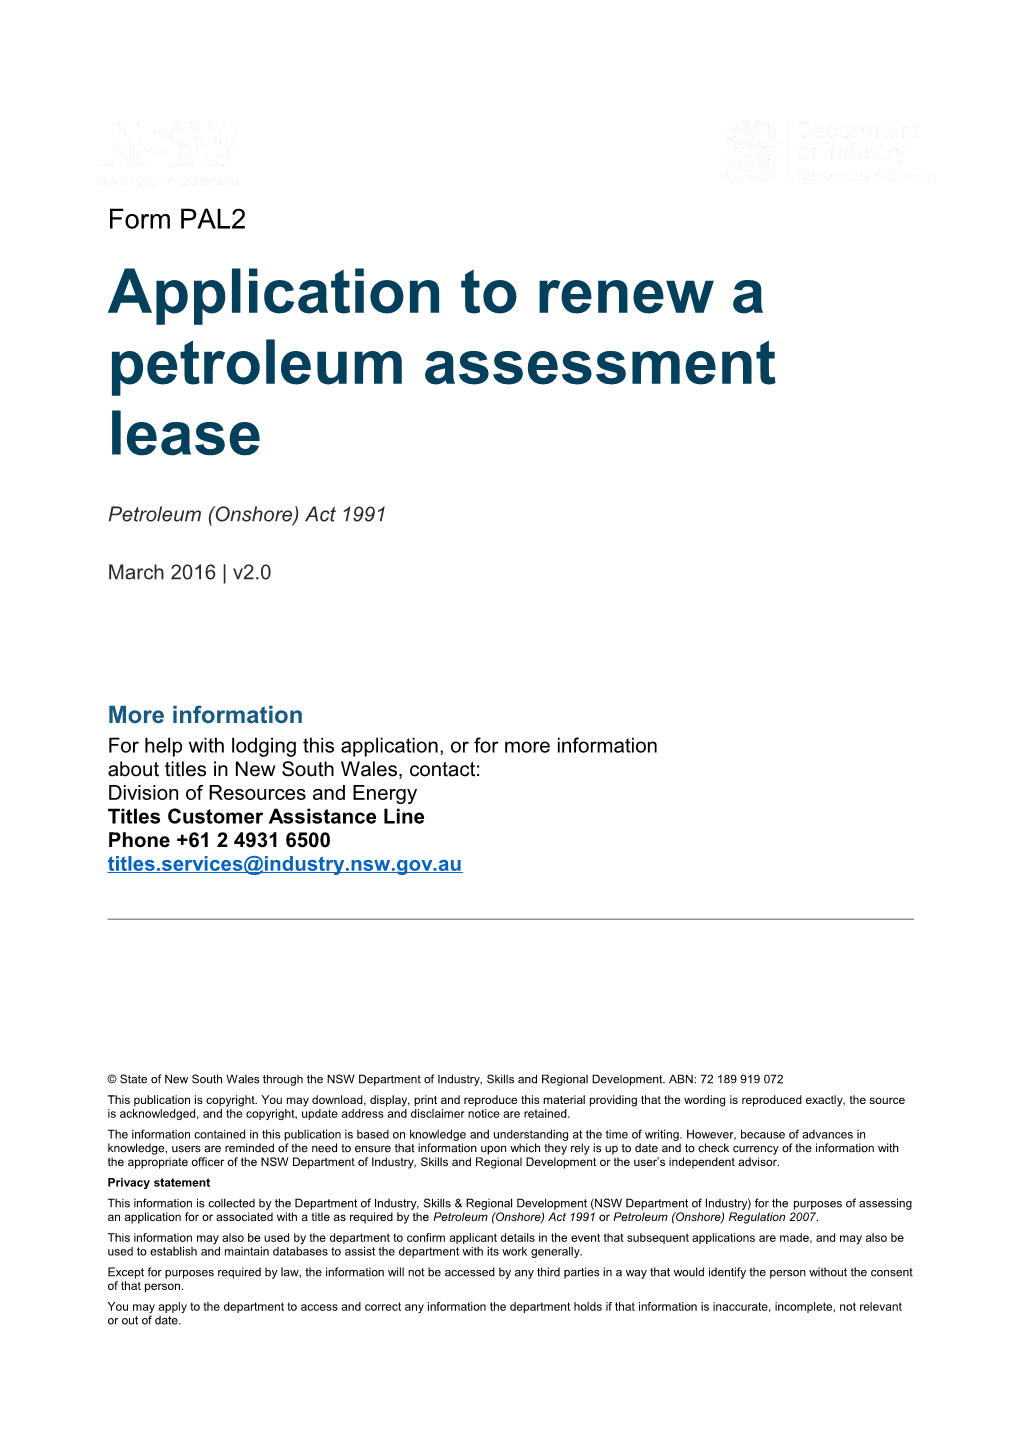 PAL2 Application to Renew a Petroleum Assessment Lease